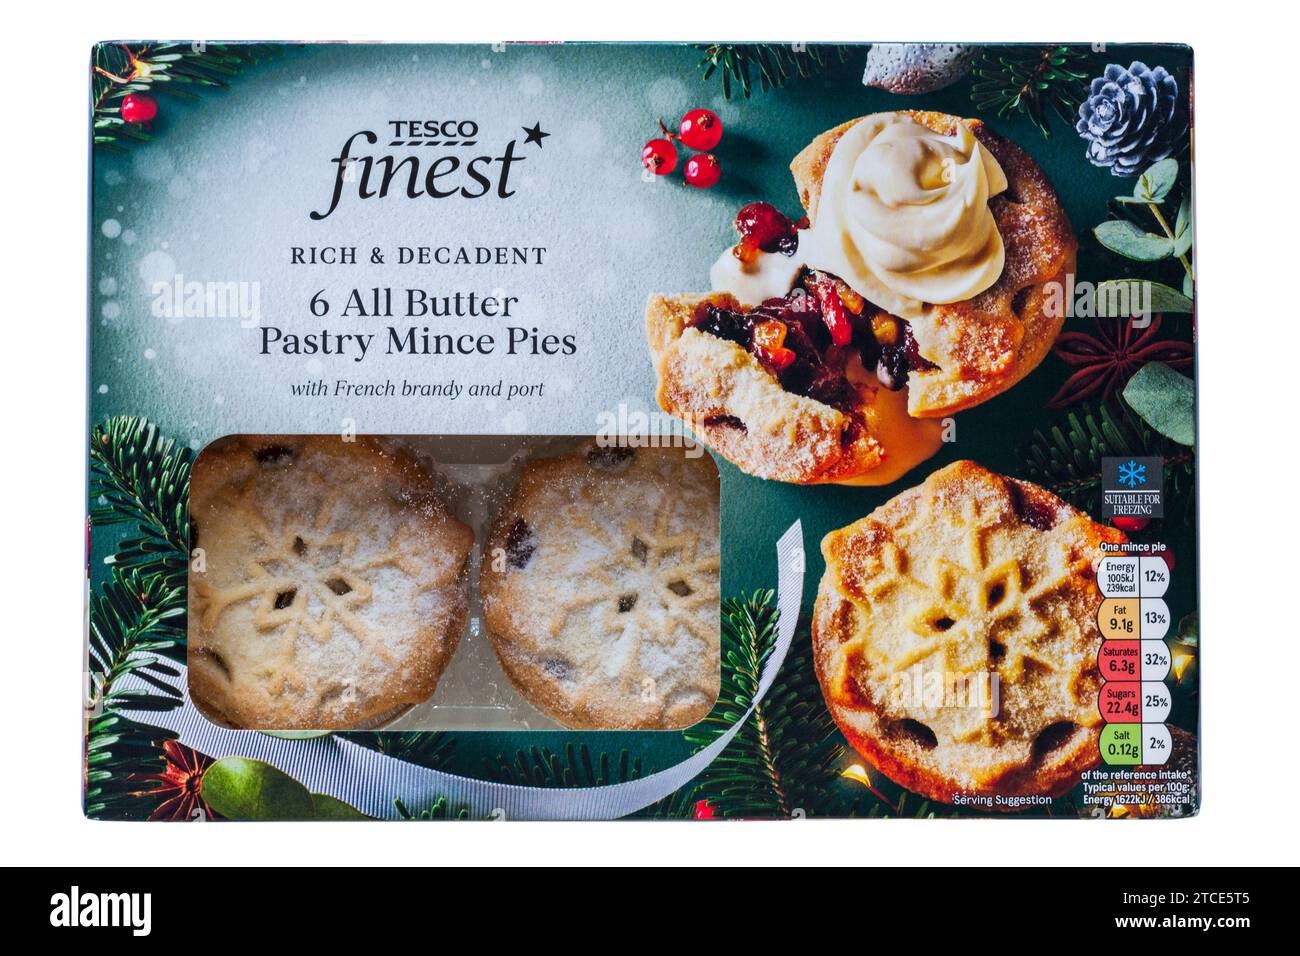 box of Tesco finest rich & decadent 6 all butter pastry Mince Pies with French brandy and port isolated on white background Stock Photo